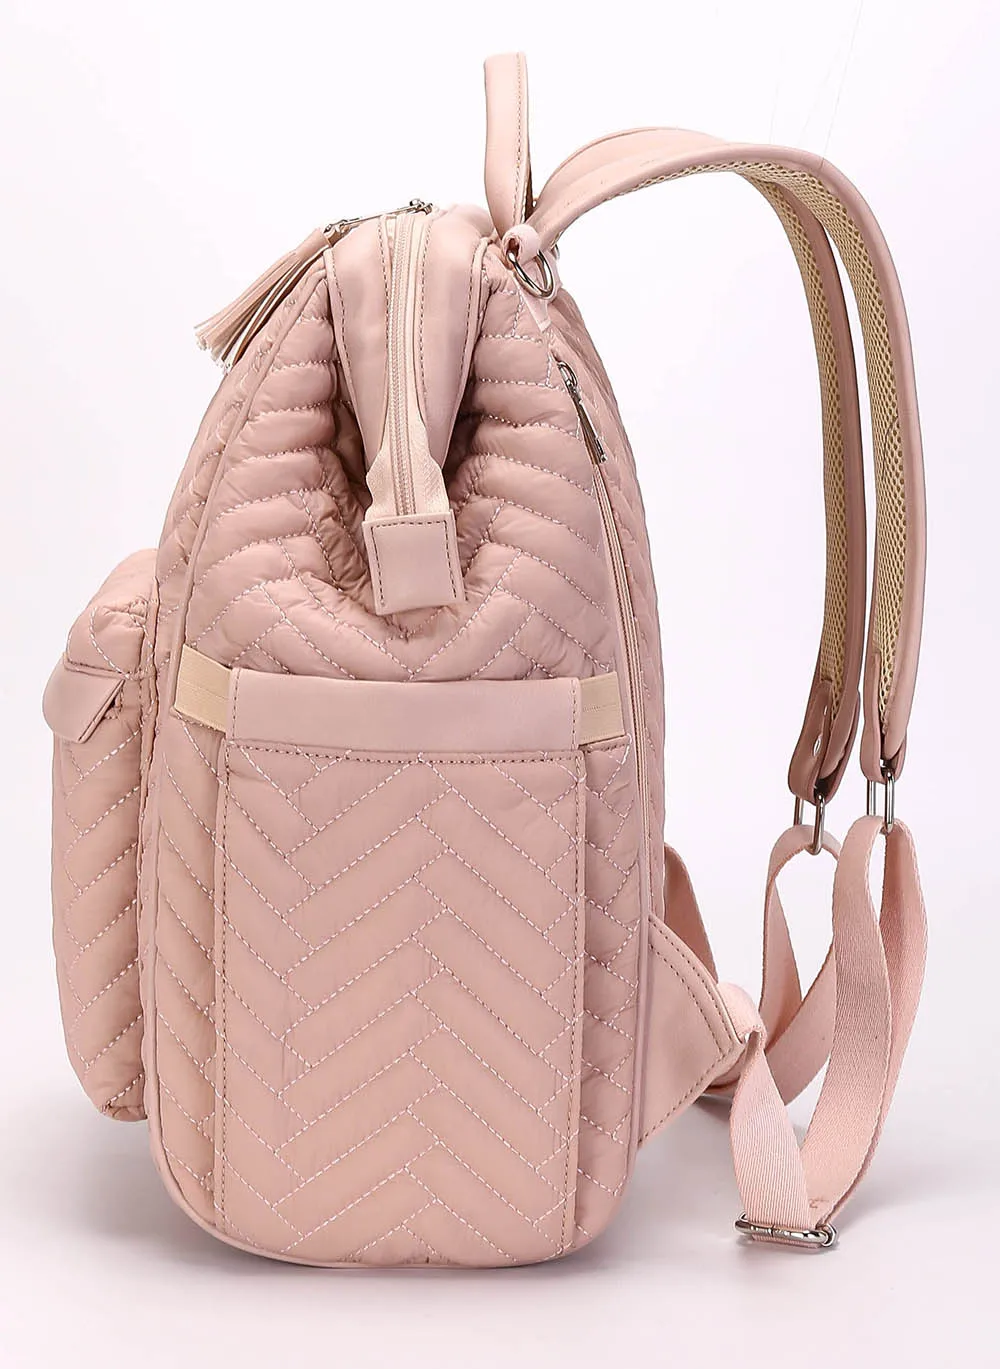 Quilted Nylon Diaper Bag Backpack,2020 New Design Pink Diaper Bag Baby Bag  For Mom Send Free Wipe Pouch And Changing Pad - Buy Quilted Nylon Diaper  Bag Backpack,2020 New Design Pink Diaper